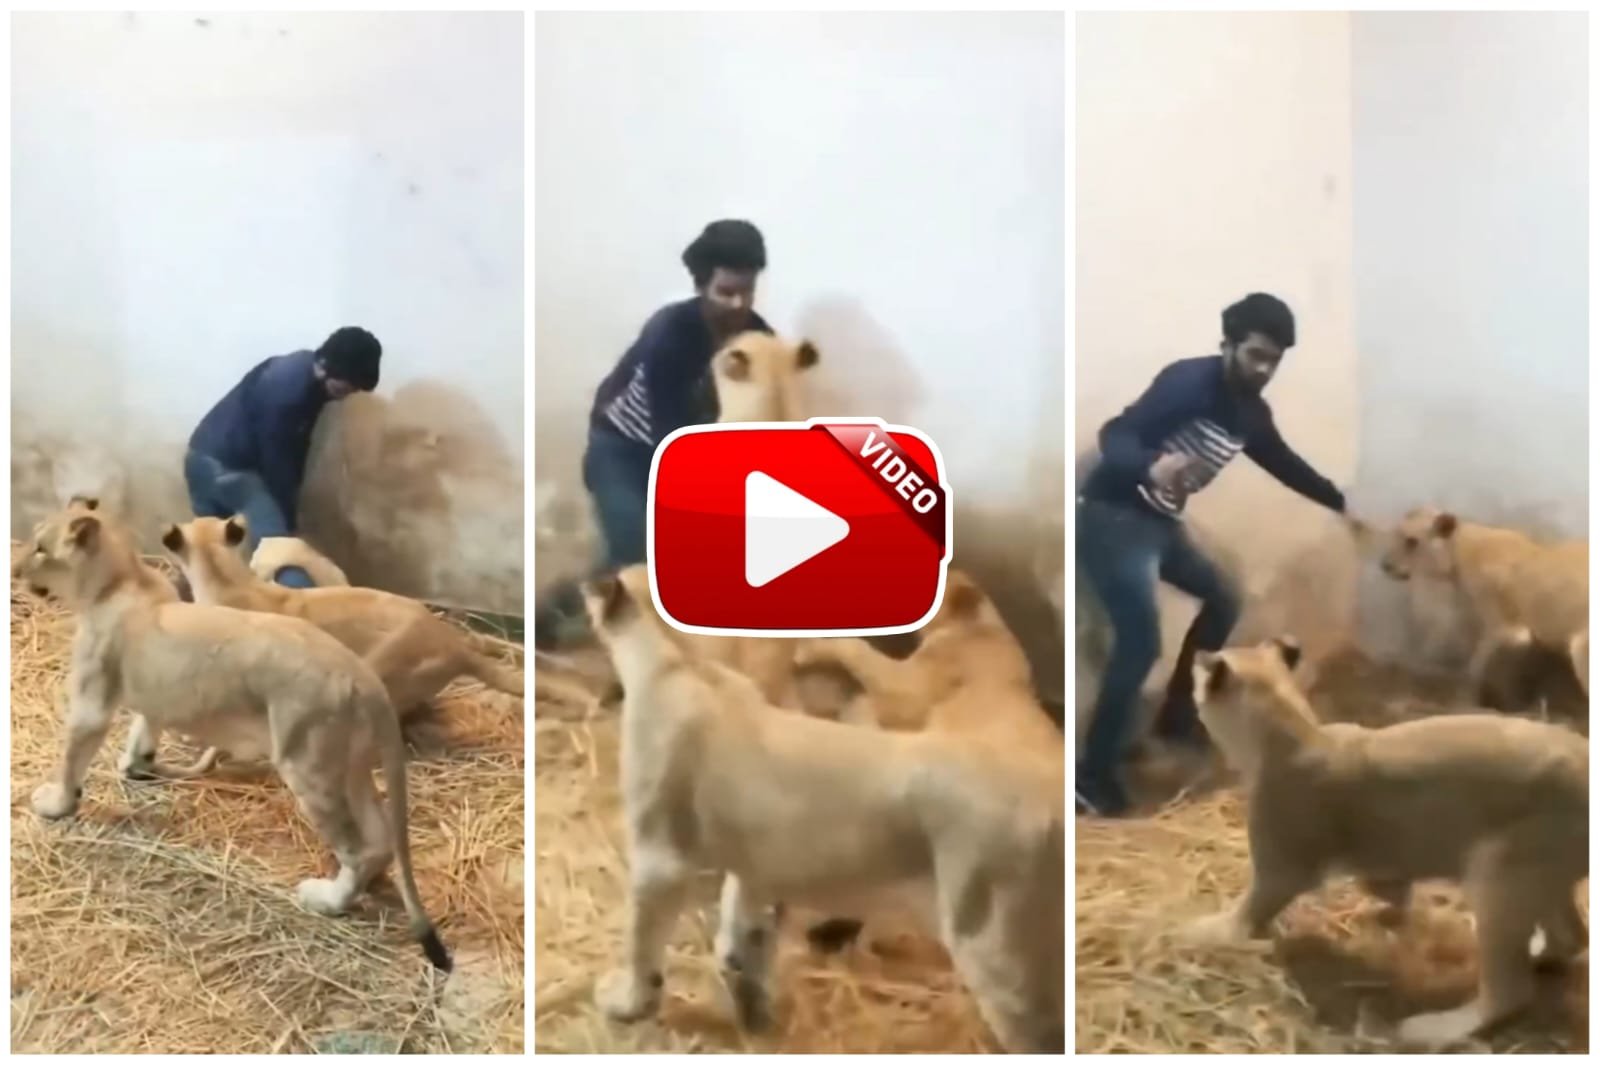 Sherni Ka Video | A man trapped alone among ferocious lionesses, video will blow your mind